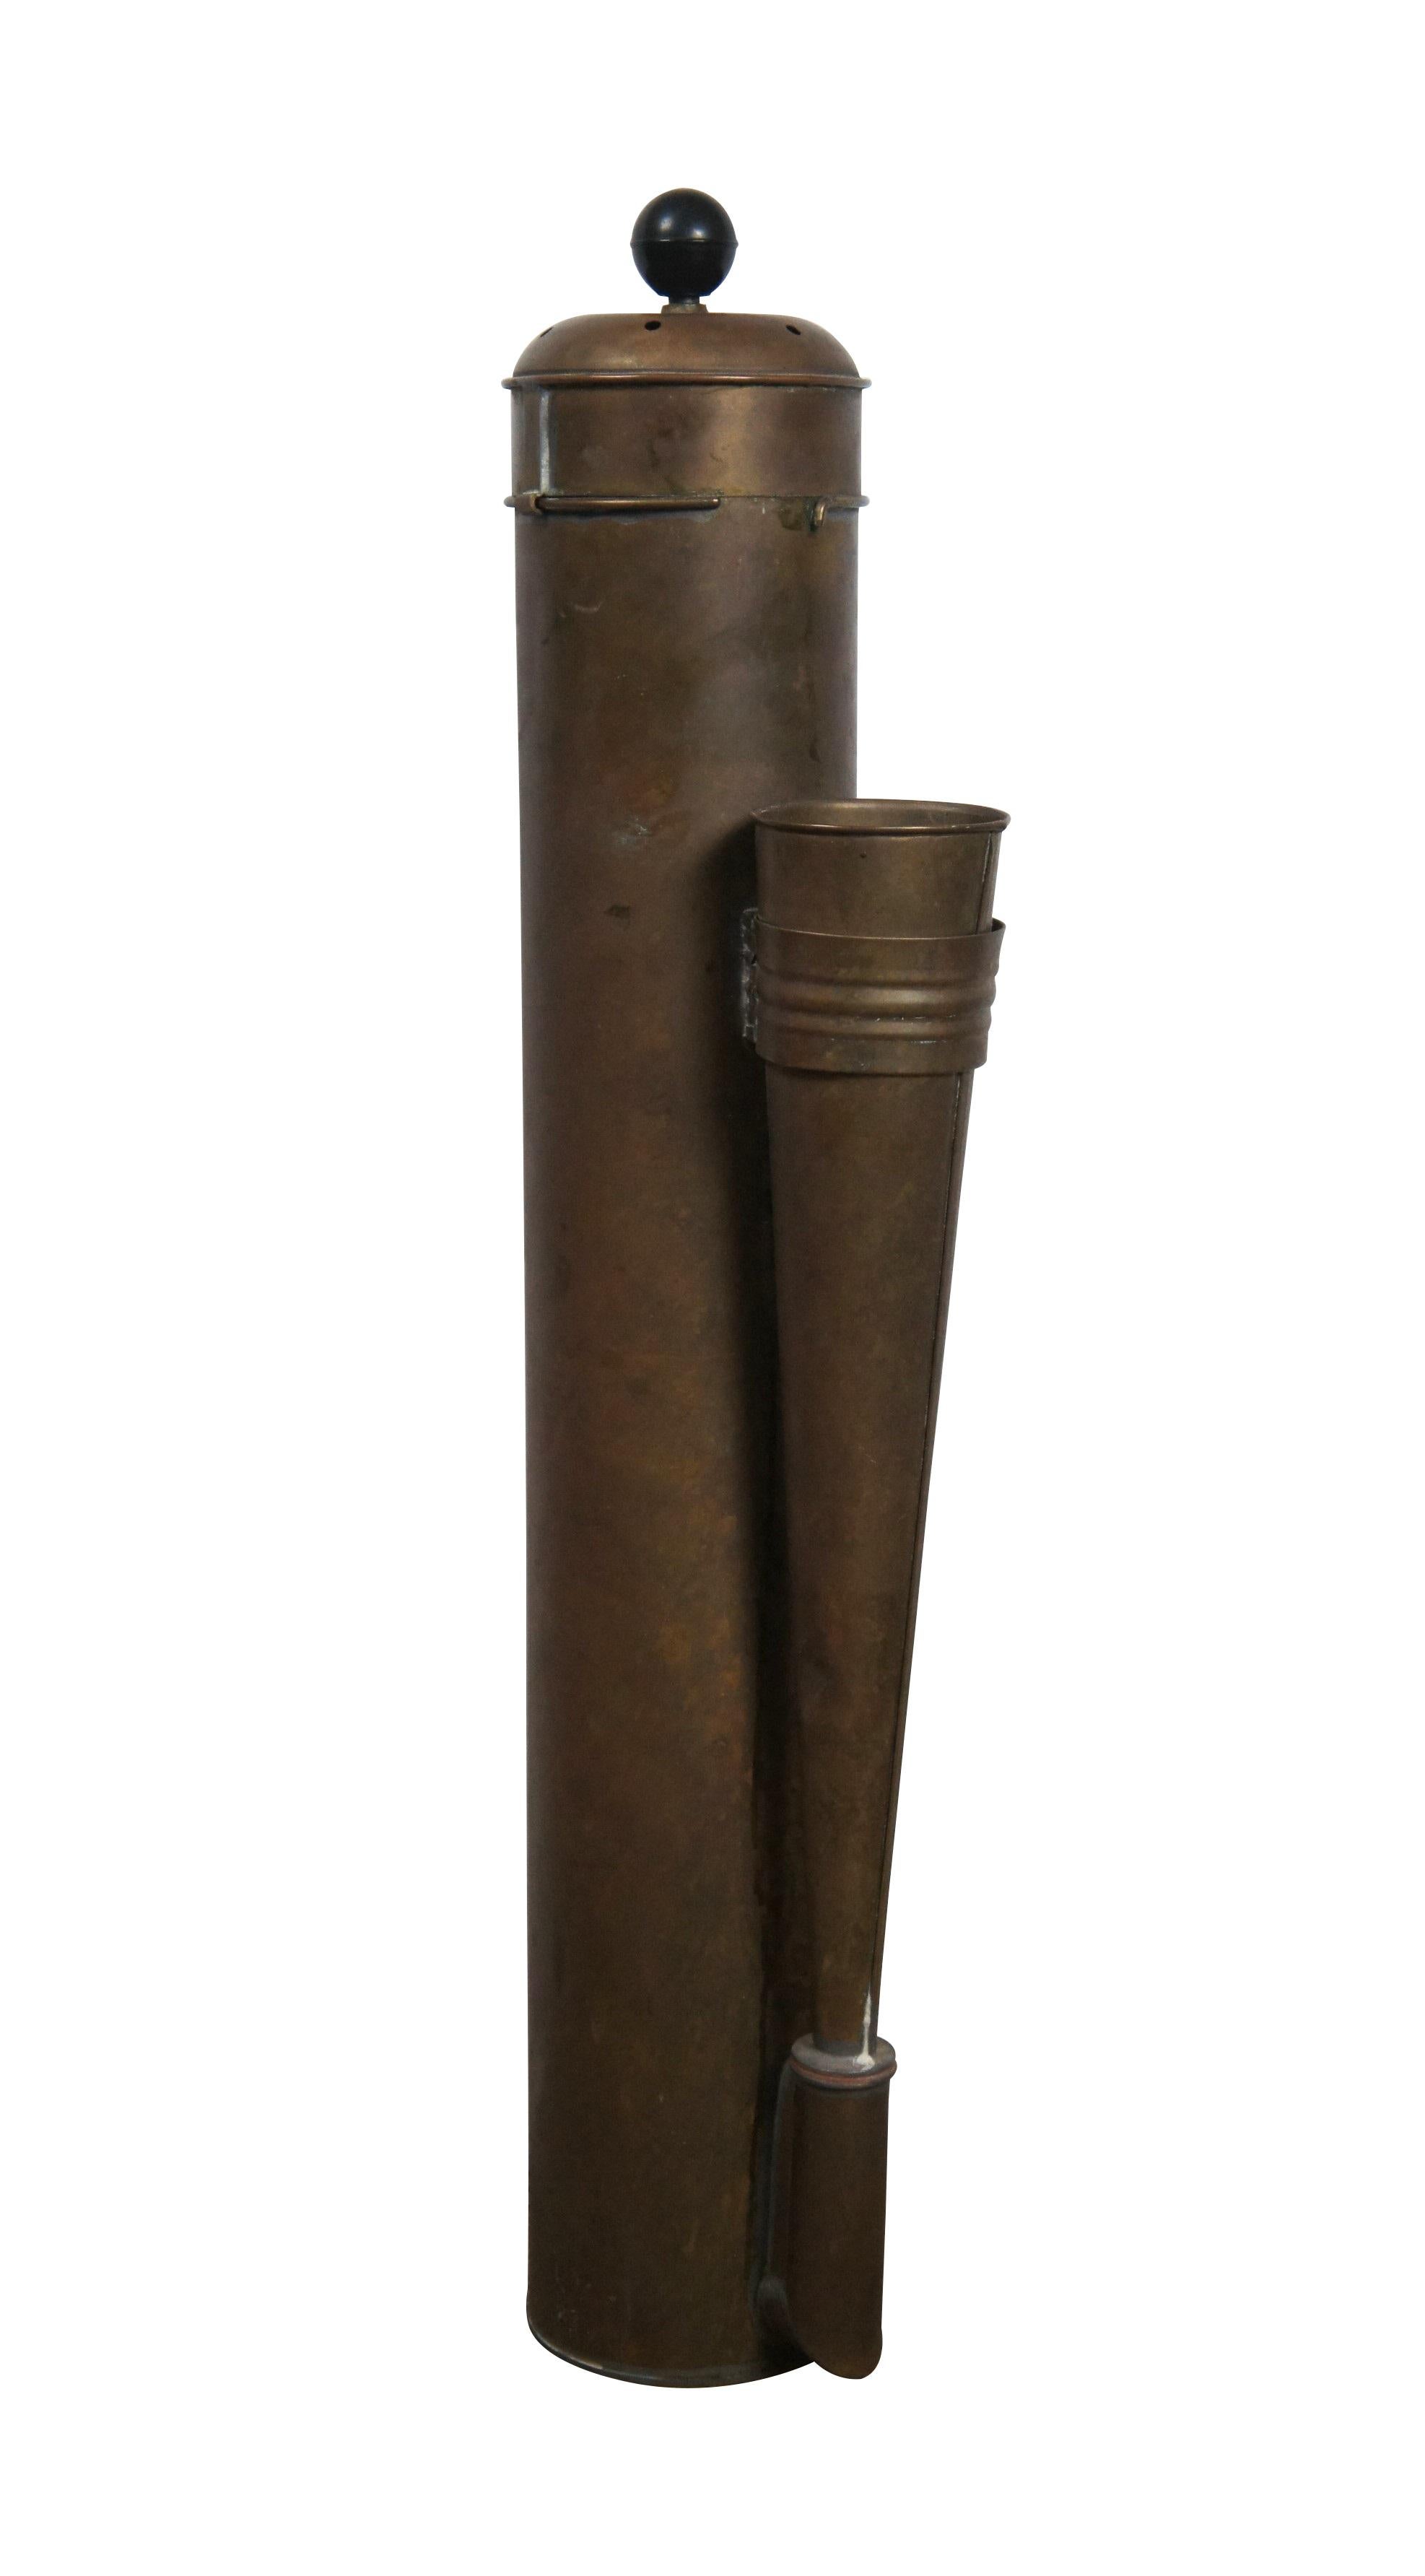 Late 19th - early 20th century brass plunger operated fog horn. Cylindrical body with horn attached to one side, pierced lid, and round, black finial on the plunger. Pair of brackets on the back for mounting in place.

Dimensions:
7.5